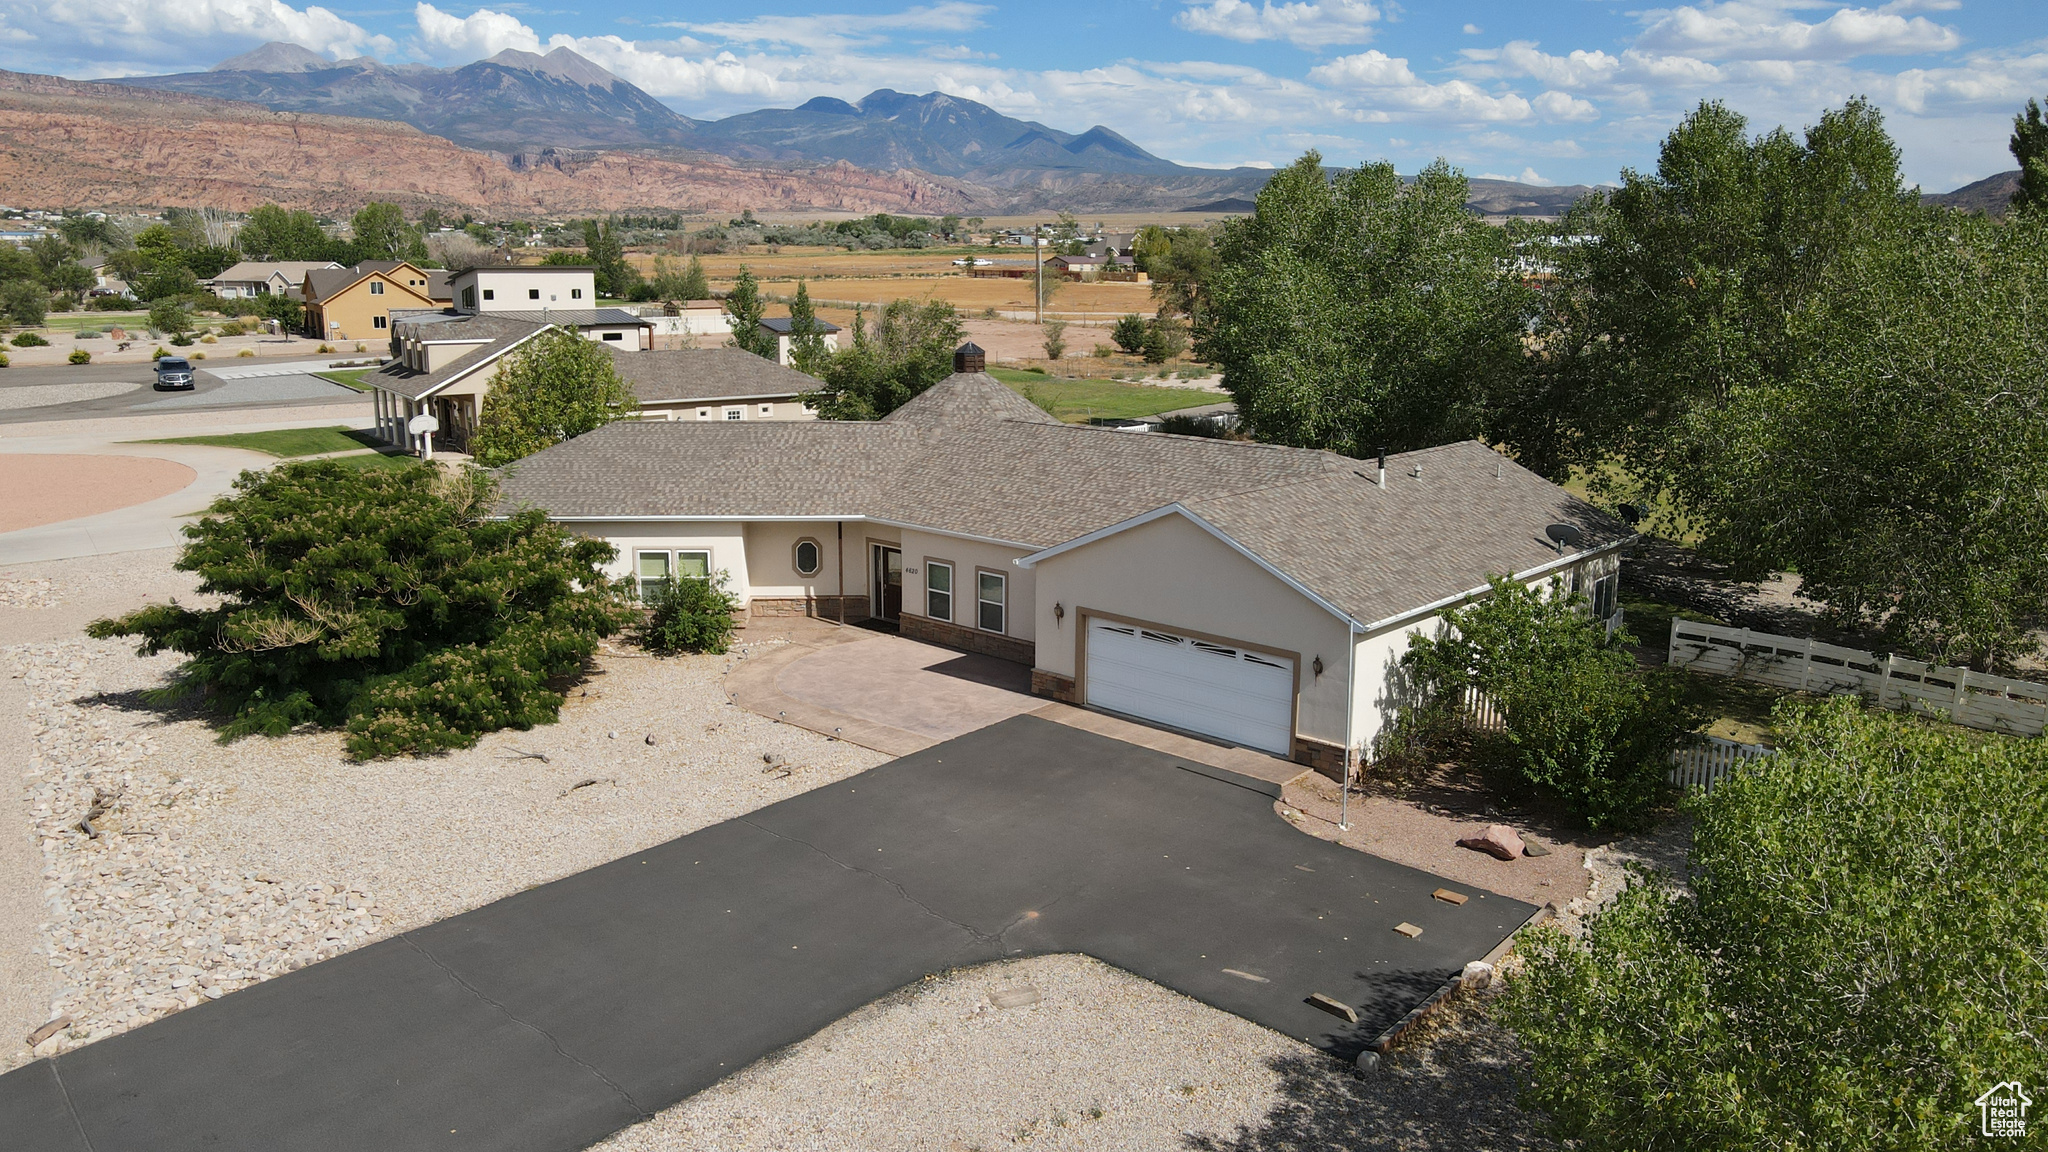 4620 SUNNY ACRES, Moab, Utah 84532, 4 Bedrooms Bedrooms, 11 Rooms Rooms,2 BathroomsBathrooms,Residential,For sale,SUNNY ACRES,1986884